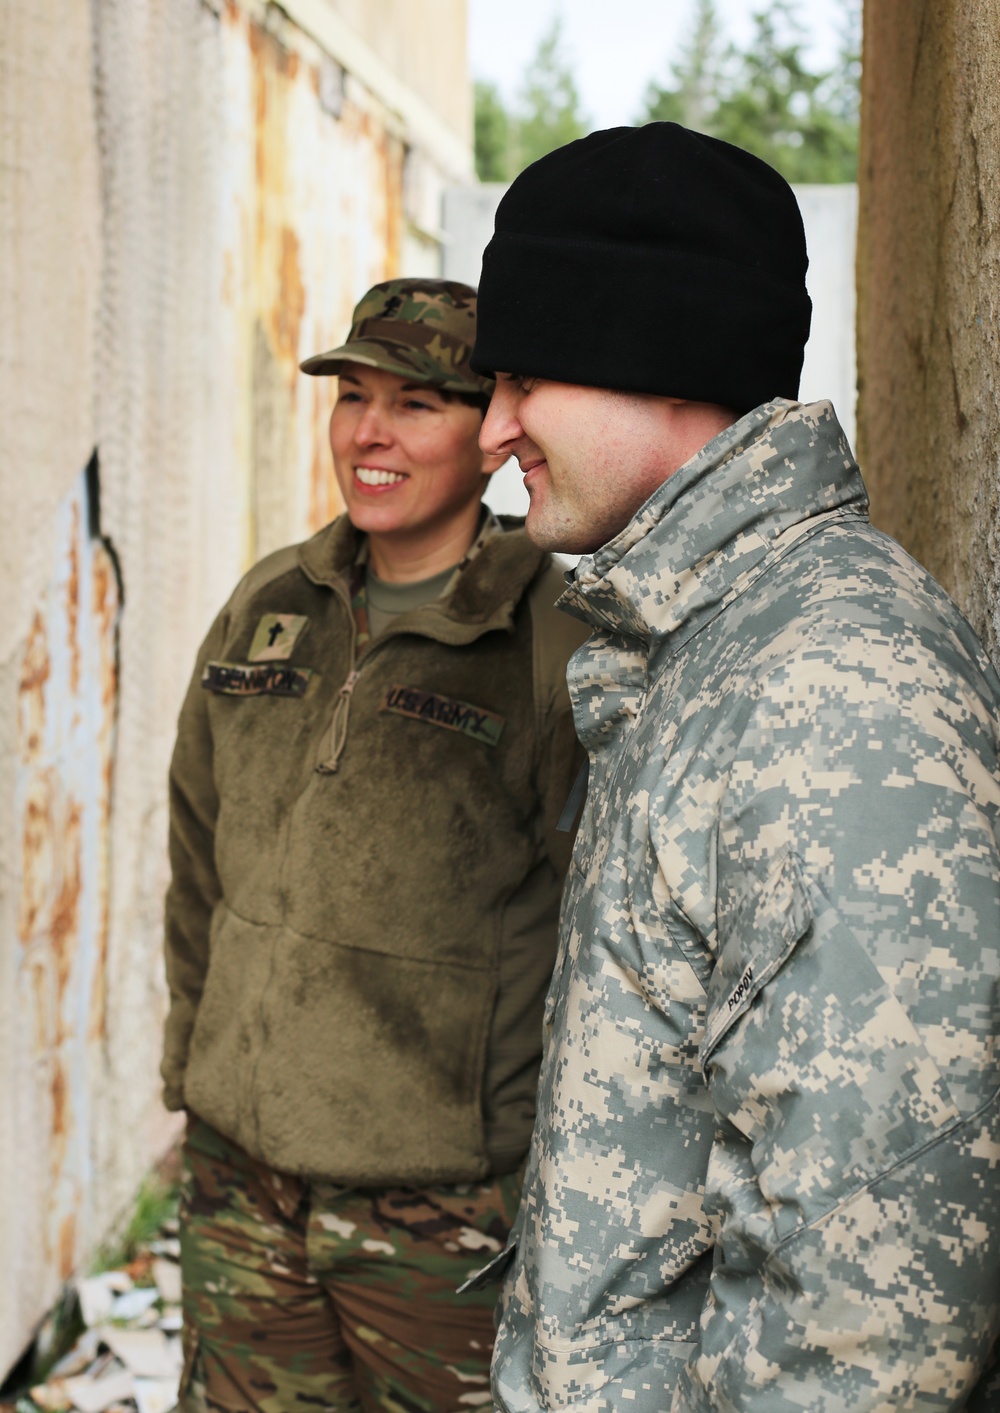 Chaplains provide resources, counseling during COVID-19 response